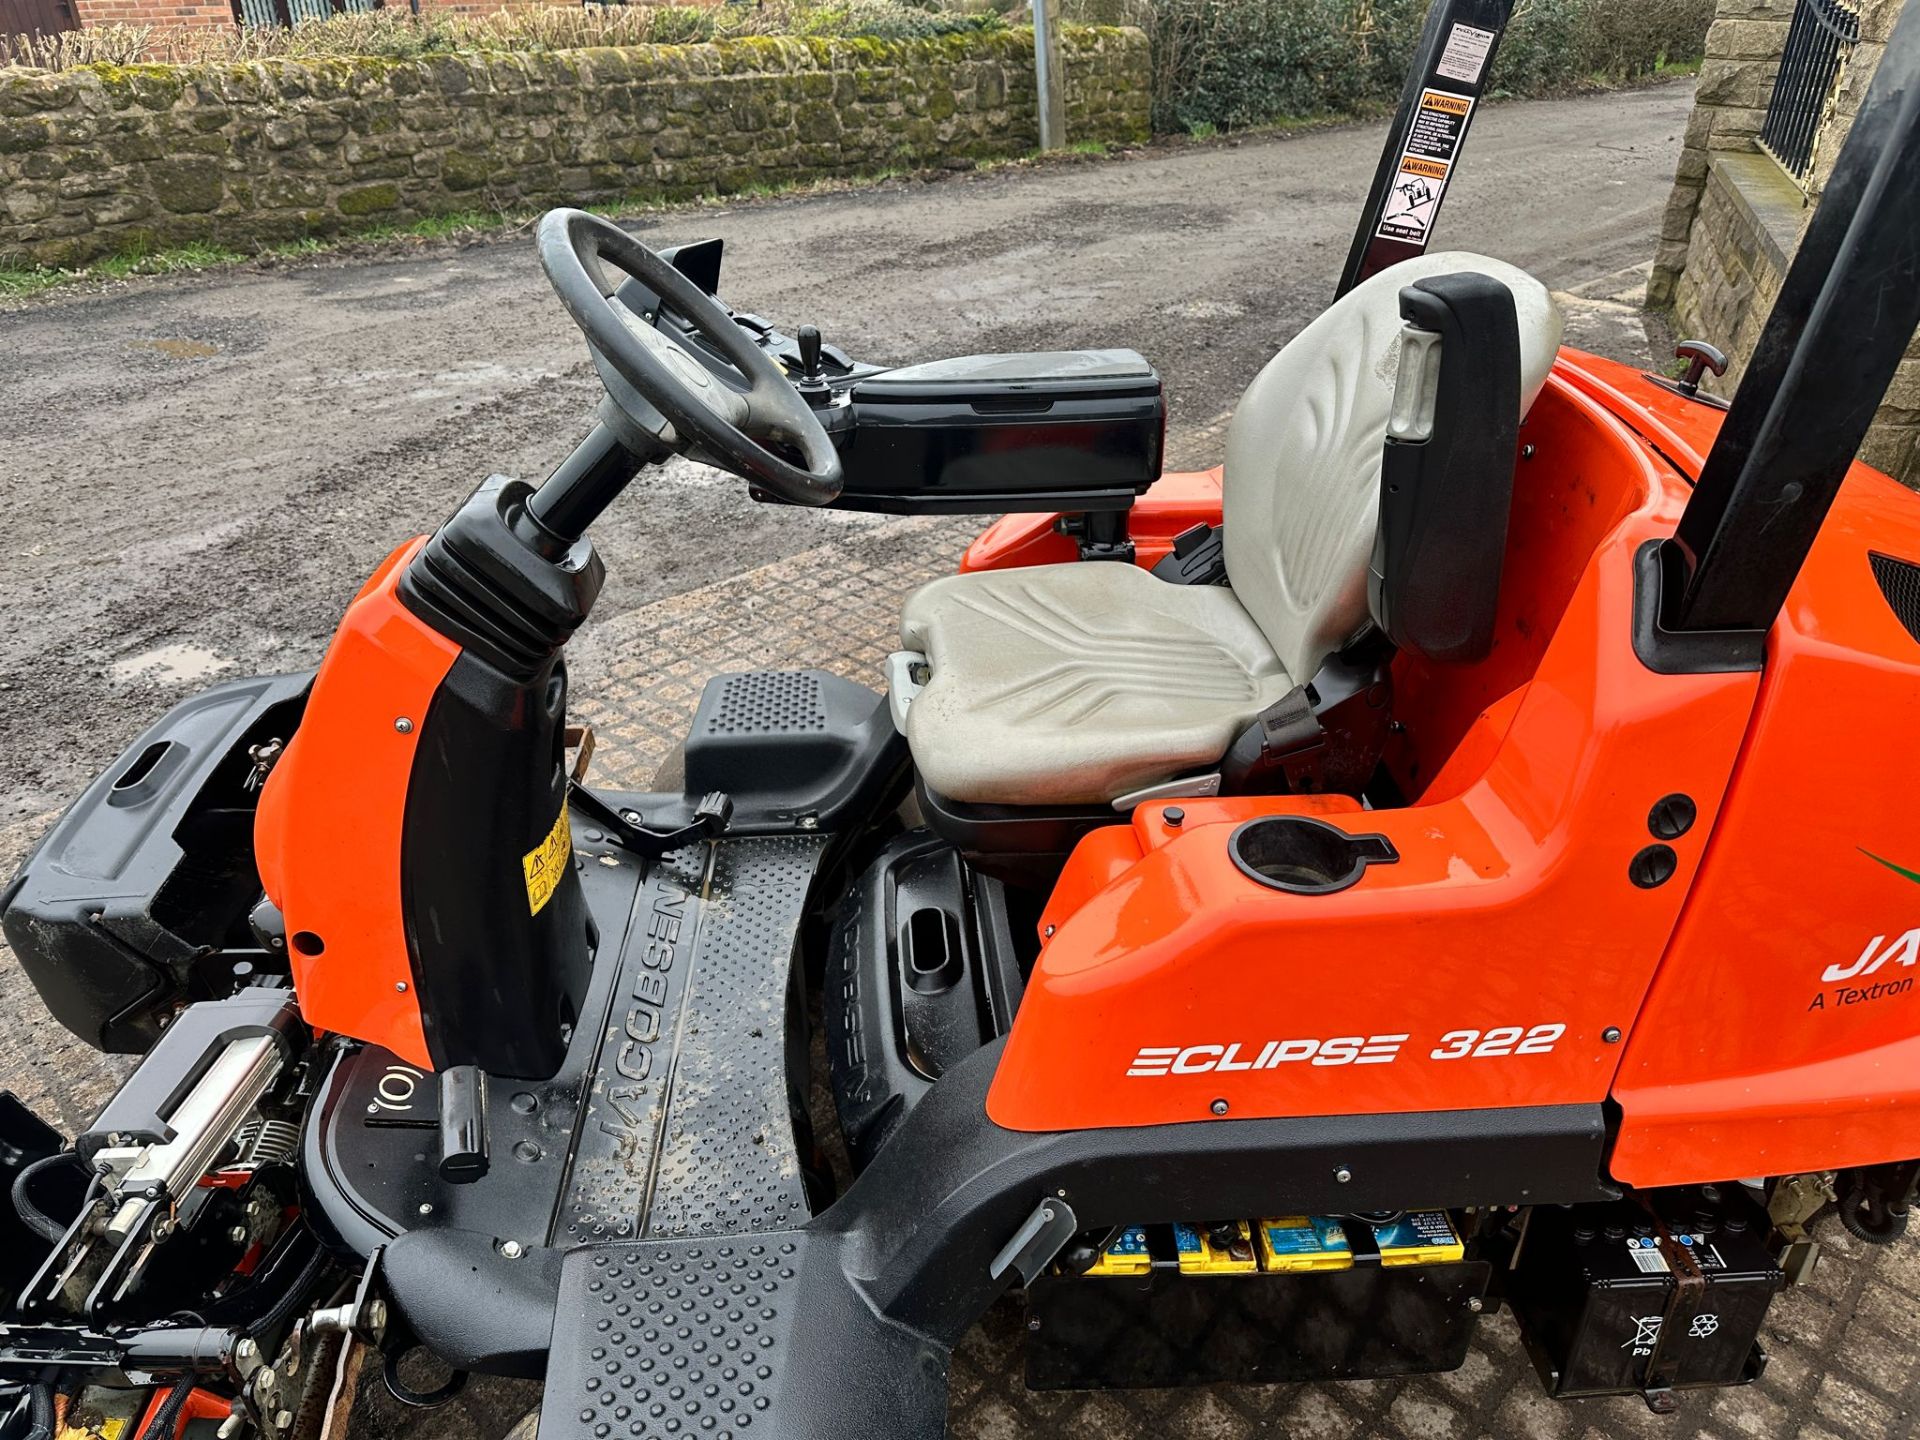 2017 JACOBSEN ECLIPSE 322 3WD HYBRID 3 GANG CYLINDER MOWER WITH GRASS BOXES *PLUS VAT* - Image 12 of 16